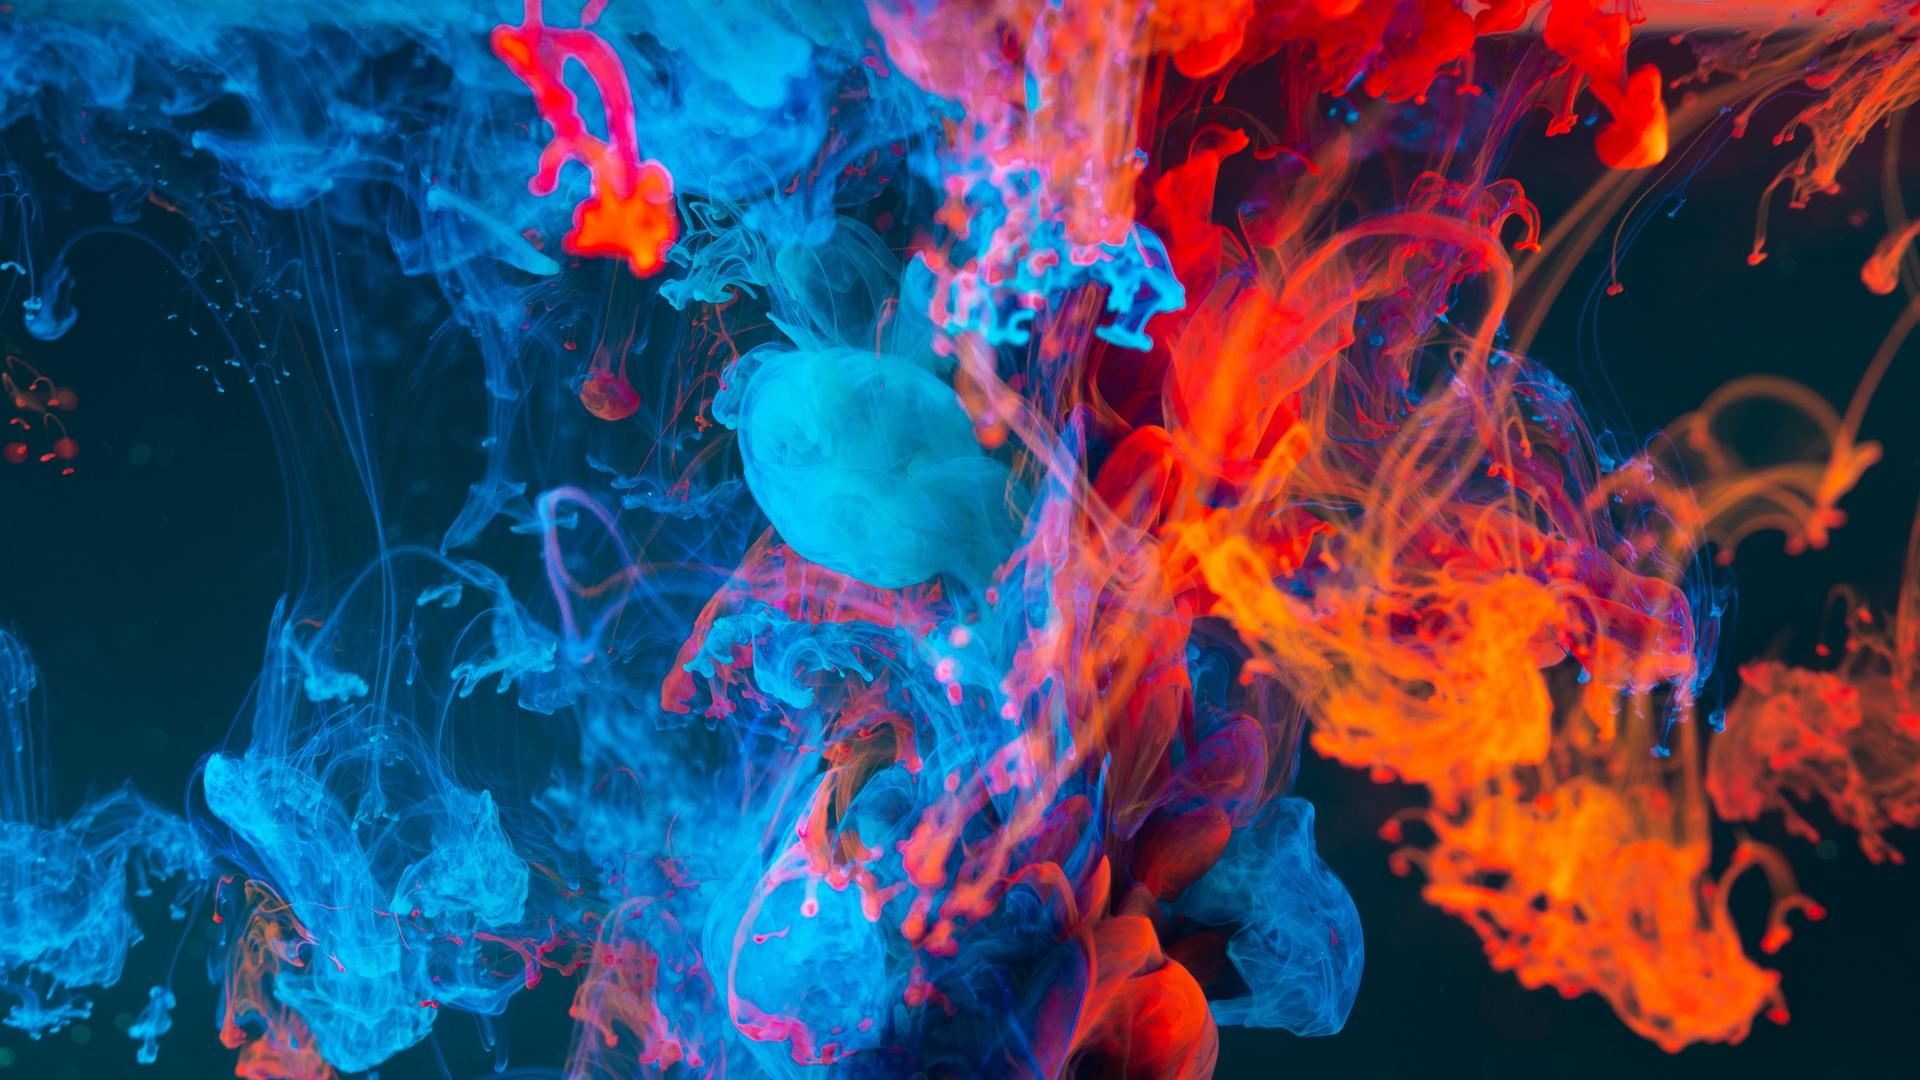 Download Wallpaper 1920x1080 Paint Liquid Abstract Colorful